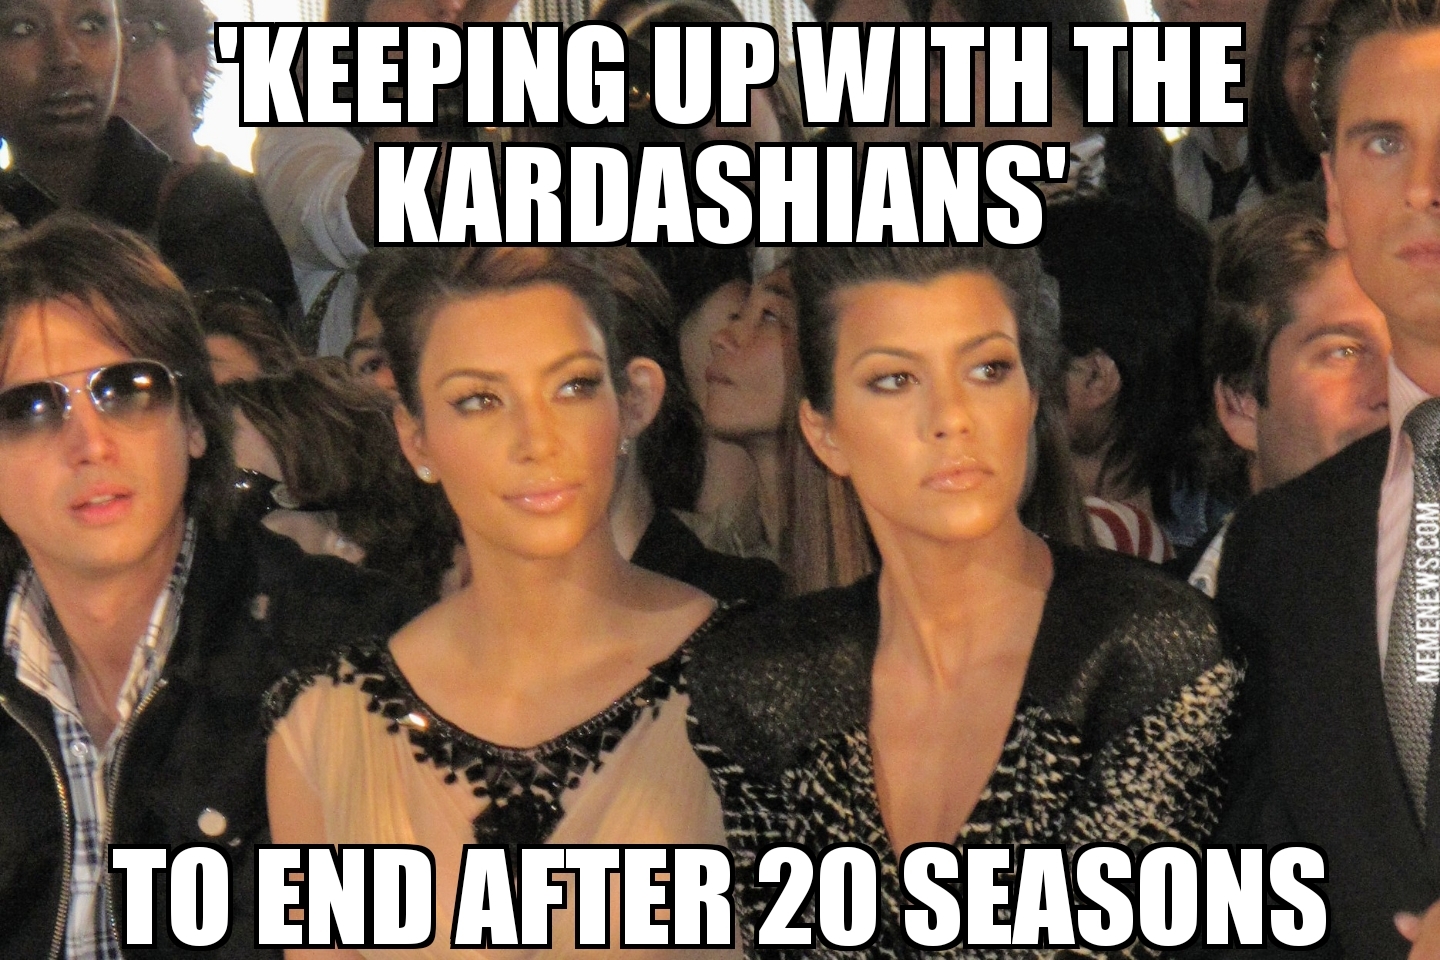 ‘Keeping Up With The Kardashians’ to end